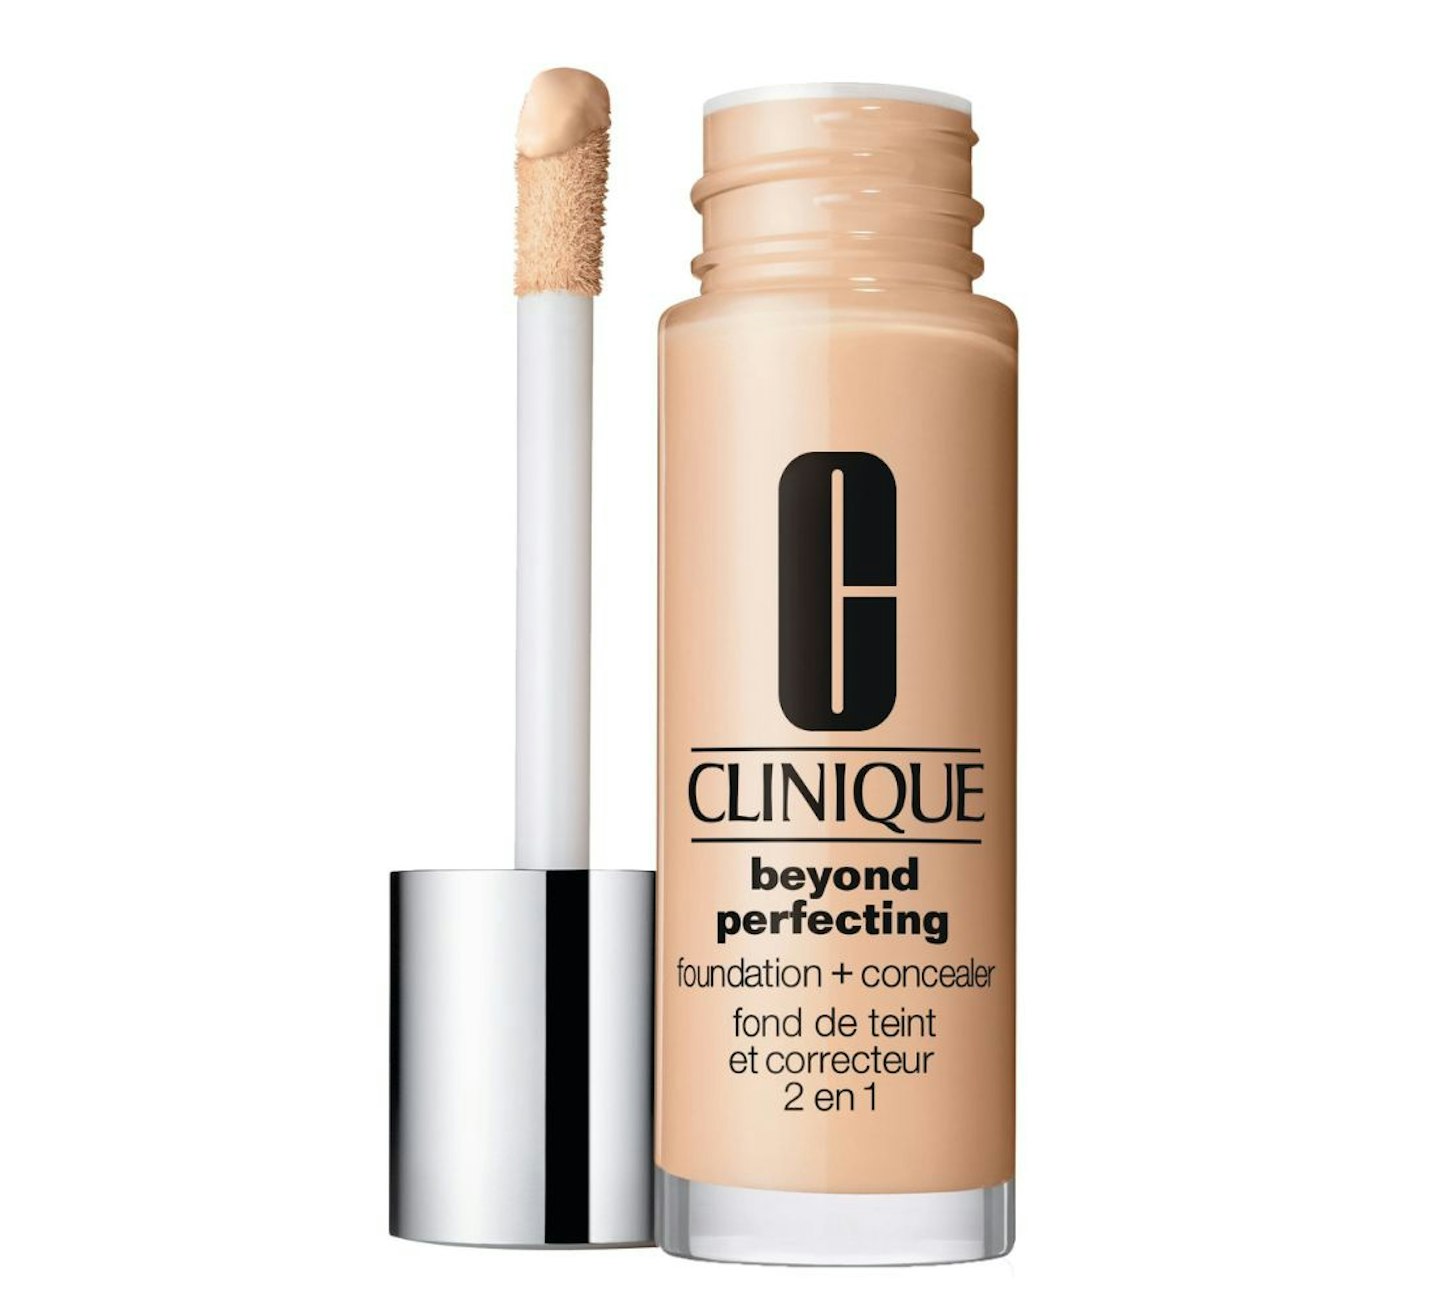 Clinique beyond Perfecting Foundation + Concealer